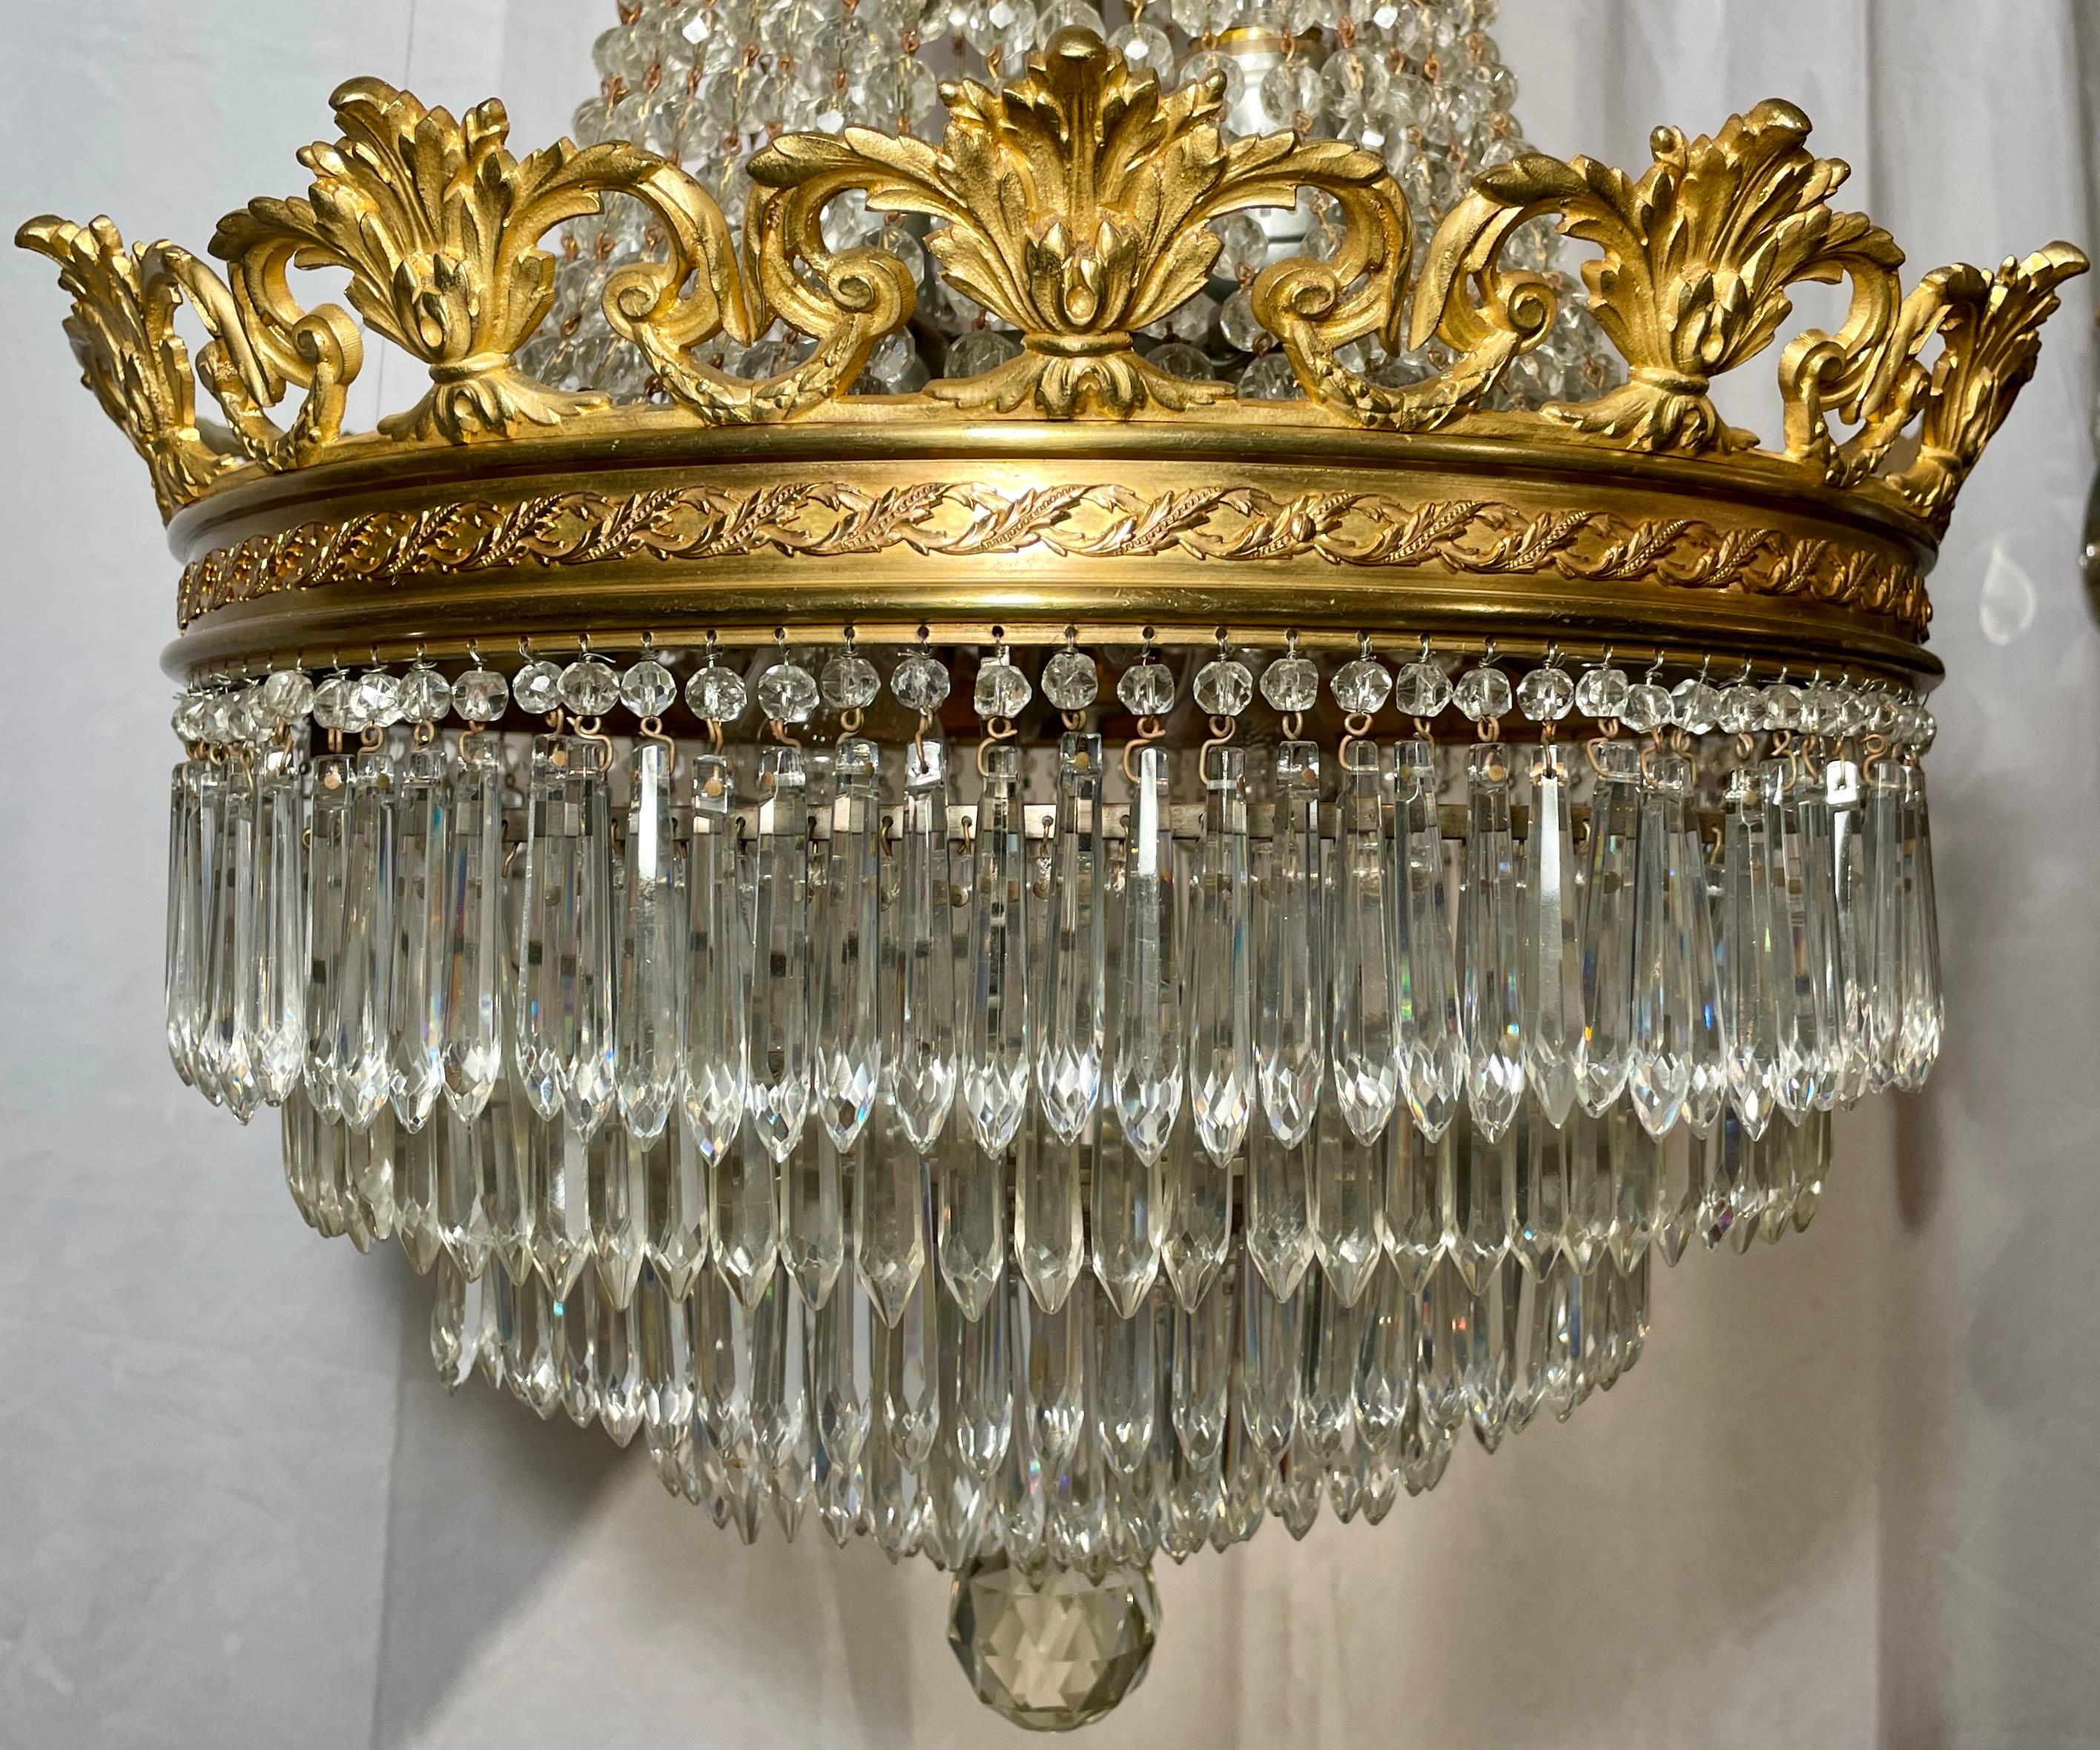 19th Century Antique French Baccarat Crystal and Gold Bronze Chandelier, Circa 1890s For Sale